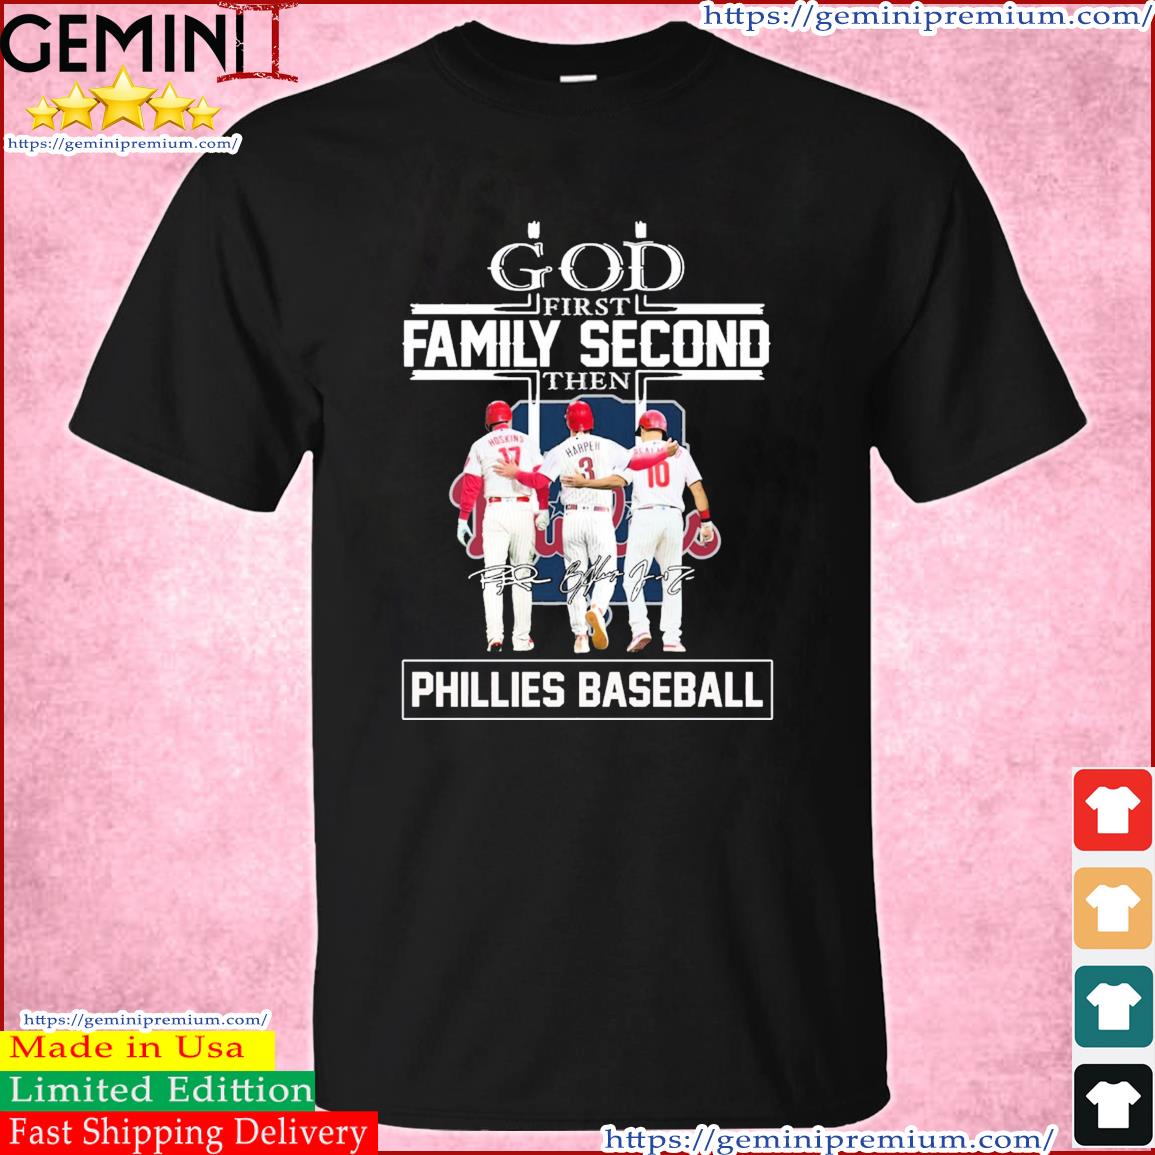 God Family Second First Then Hoskins Harper And Realmuto Phillies Baseball Signatures Shirt